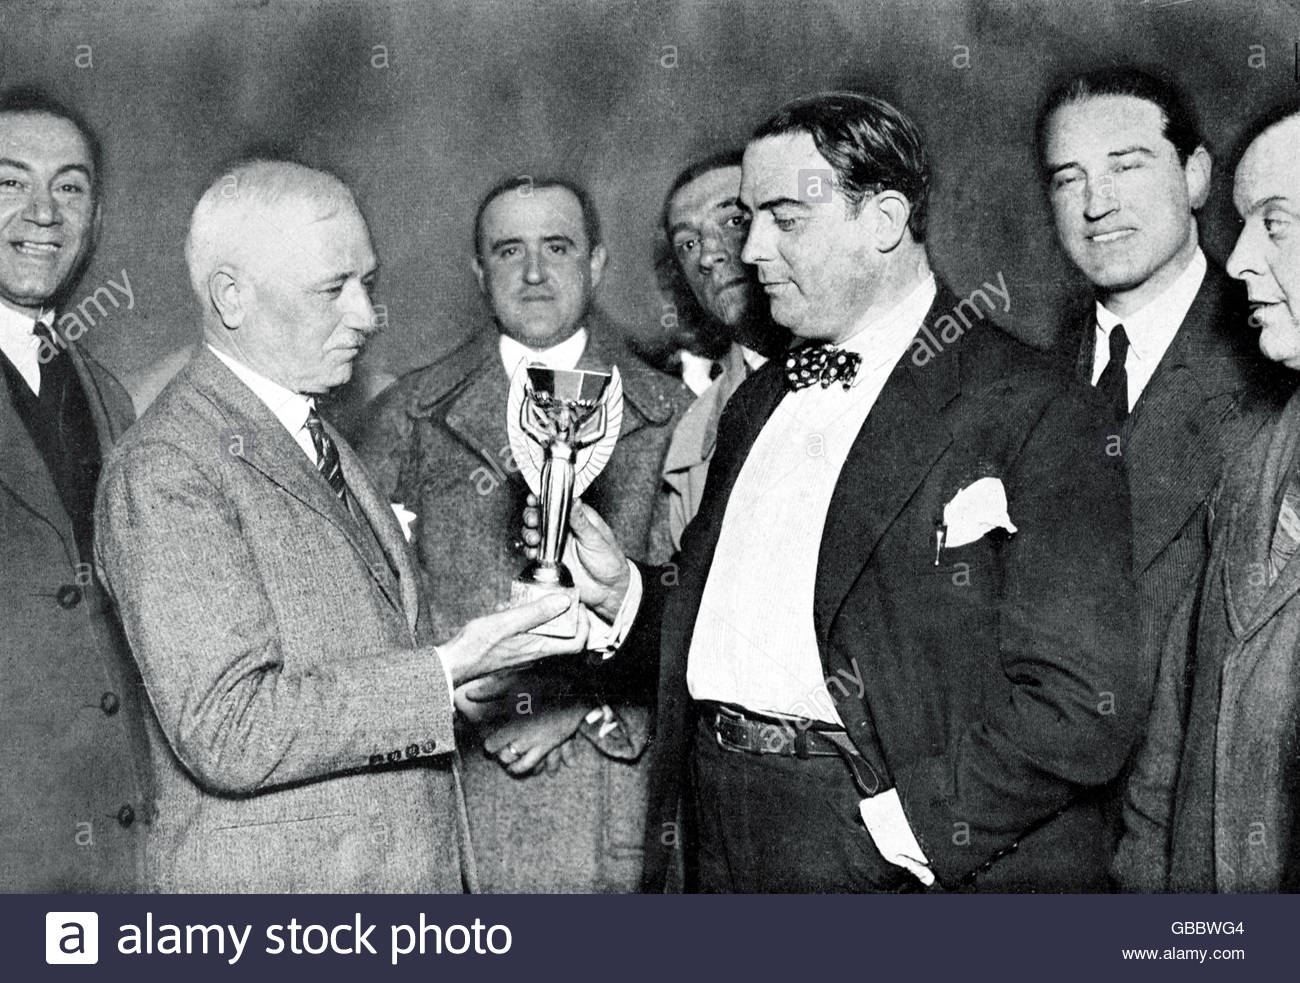 17-56-41-l-r-fifa-president-jules-rimet-presents-the-world-cup-to-dr-paul-jude-GBBWG4